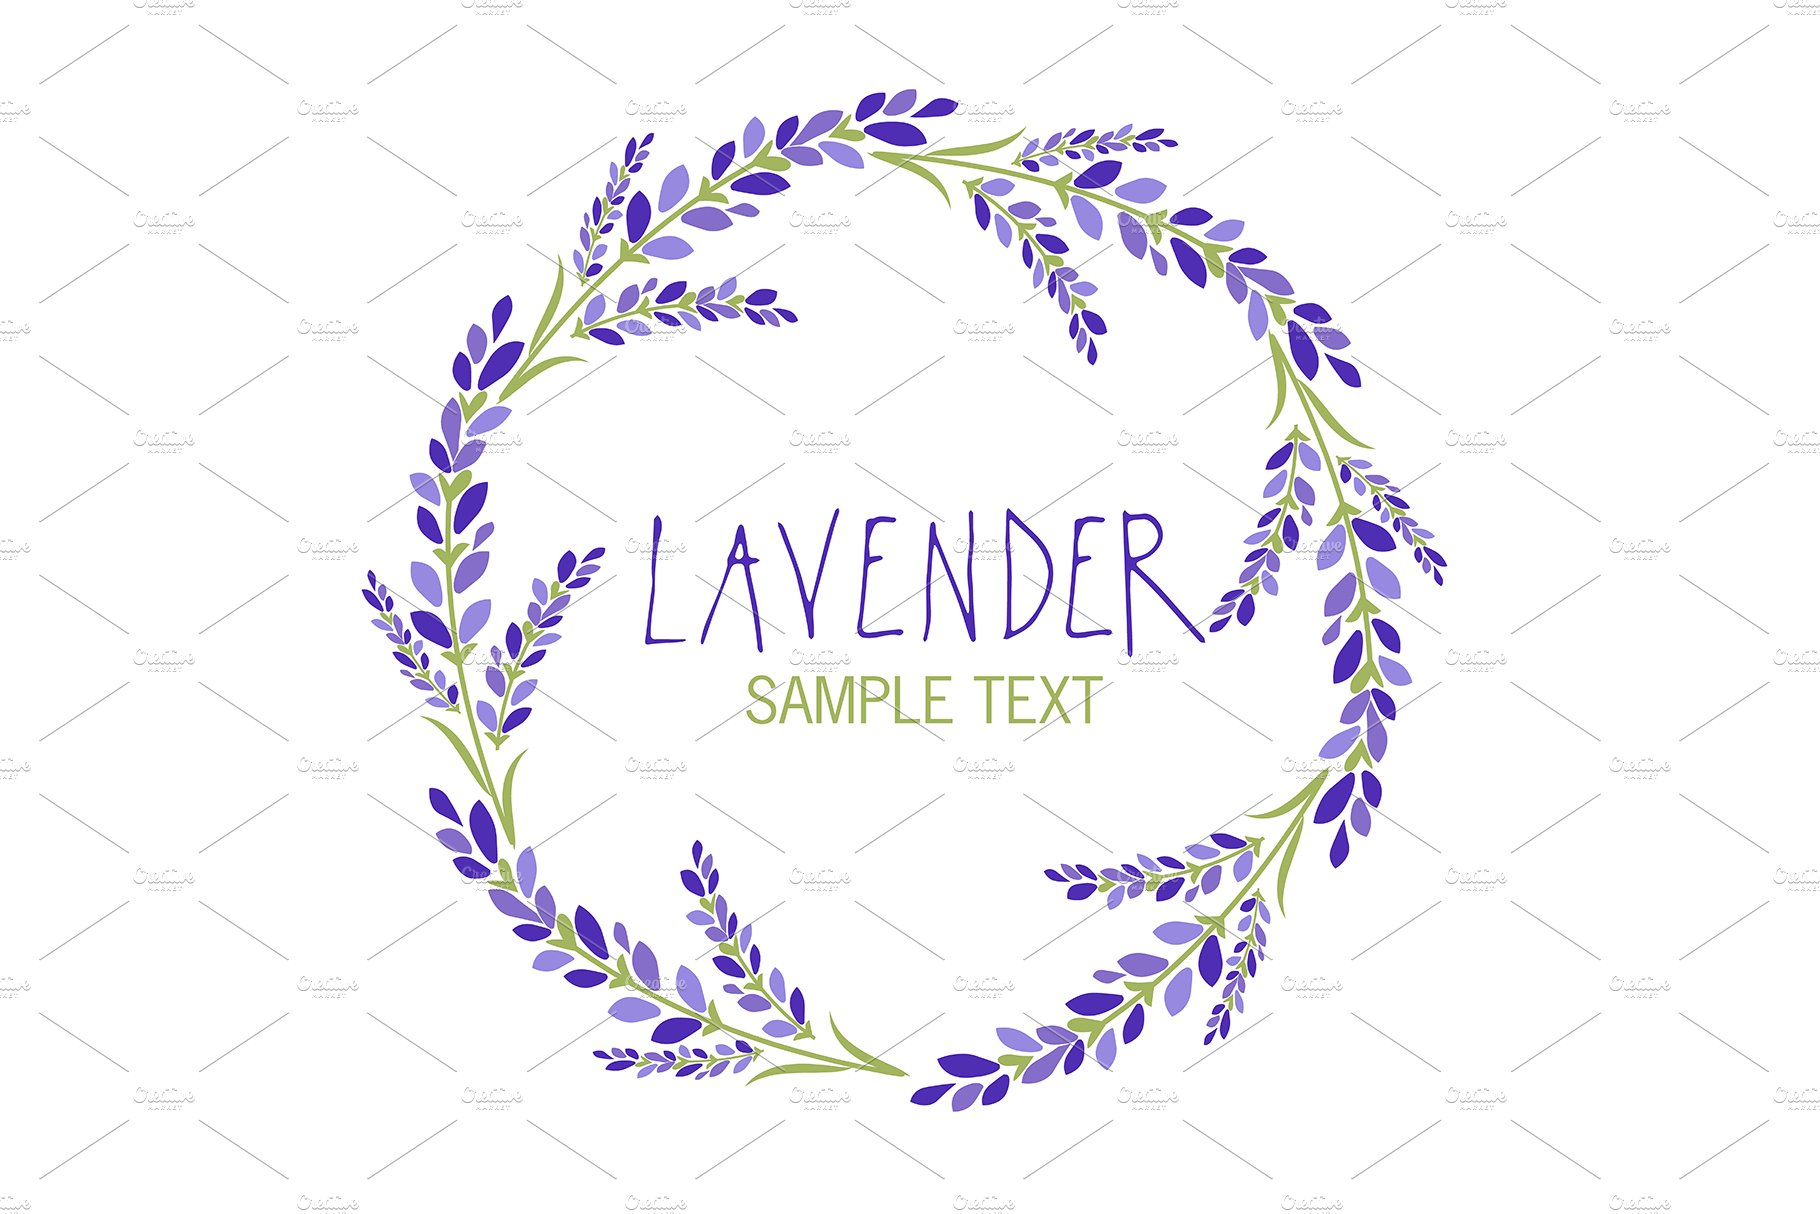 Lavender Edition VII (Logos) cover image.